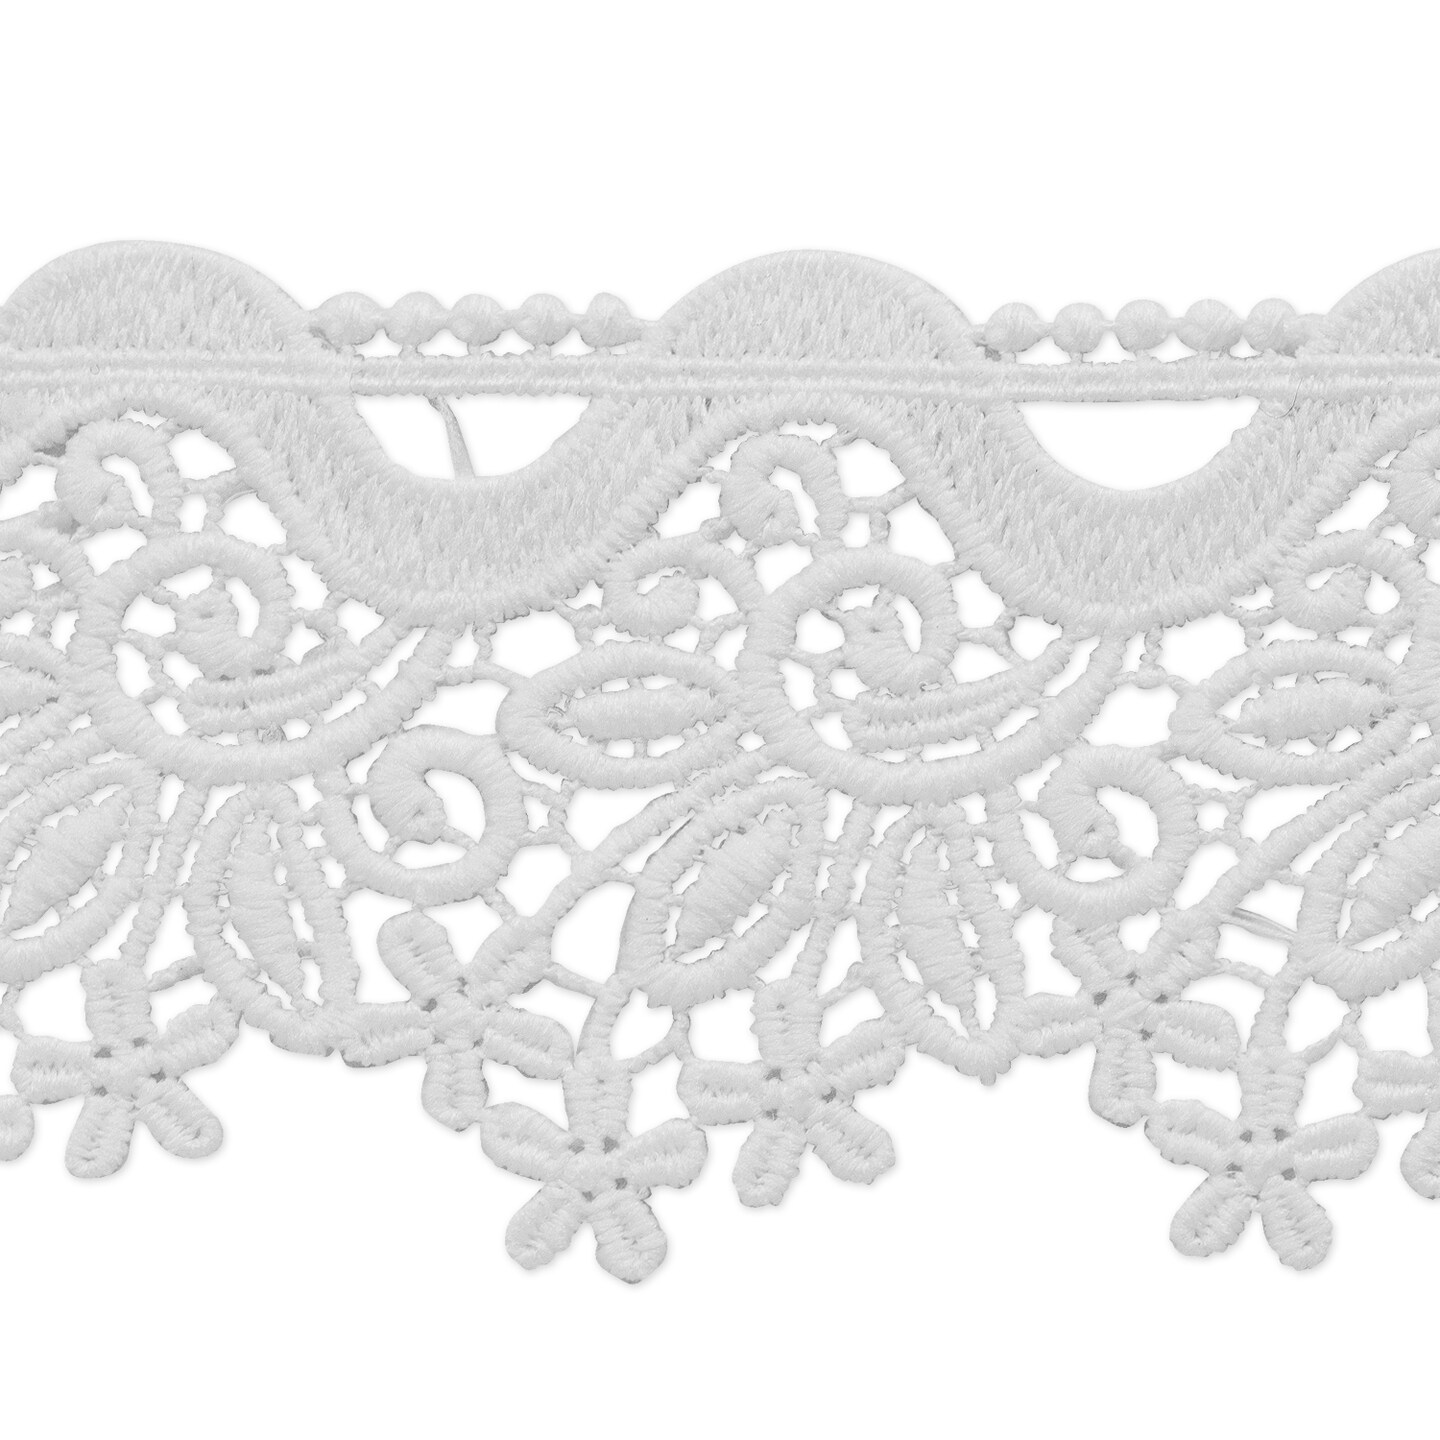 5 Yards of Beena Embroidered Designer Venice Lace Trim